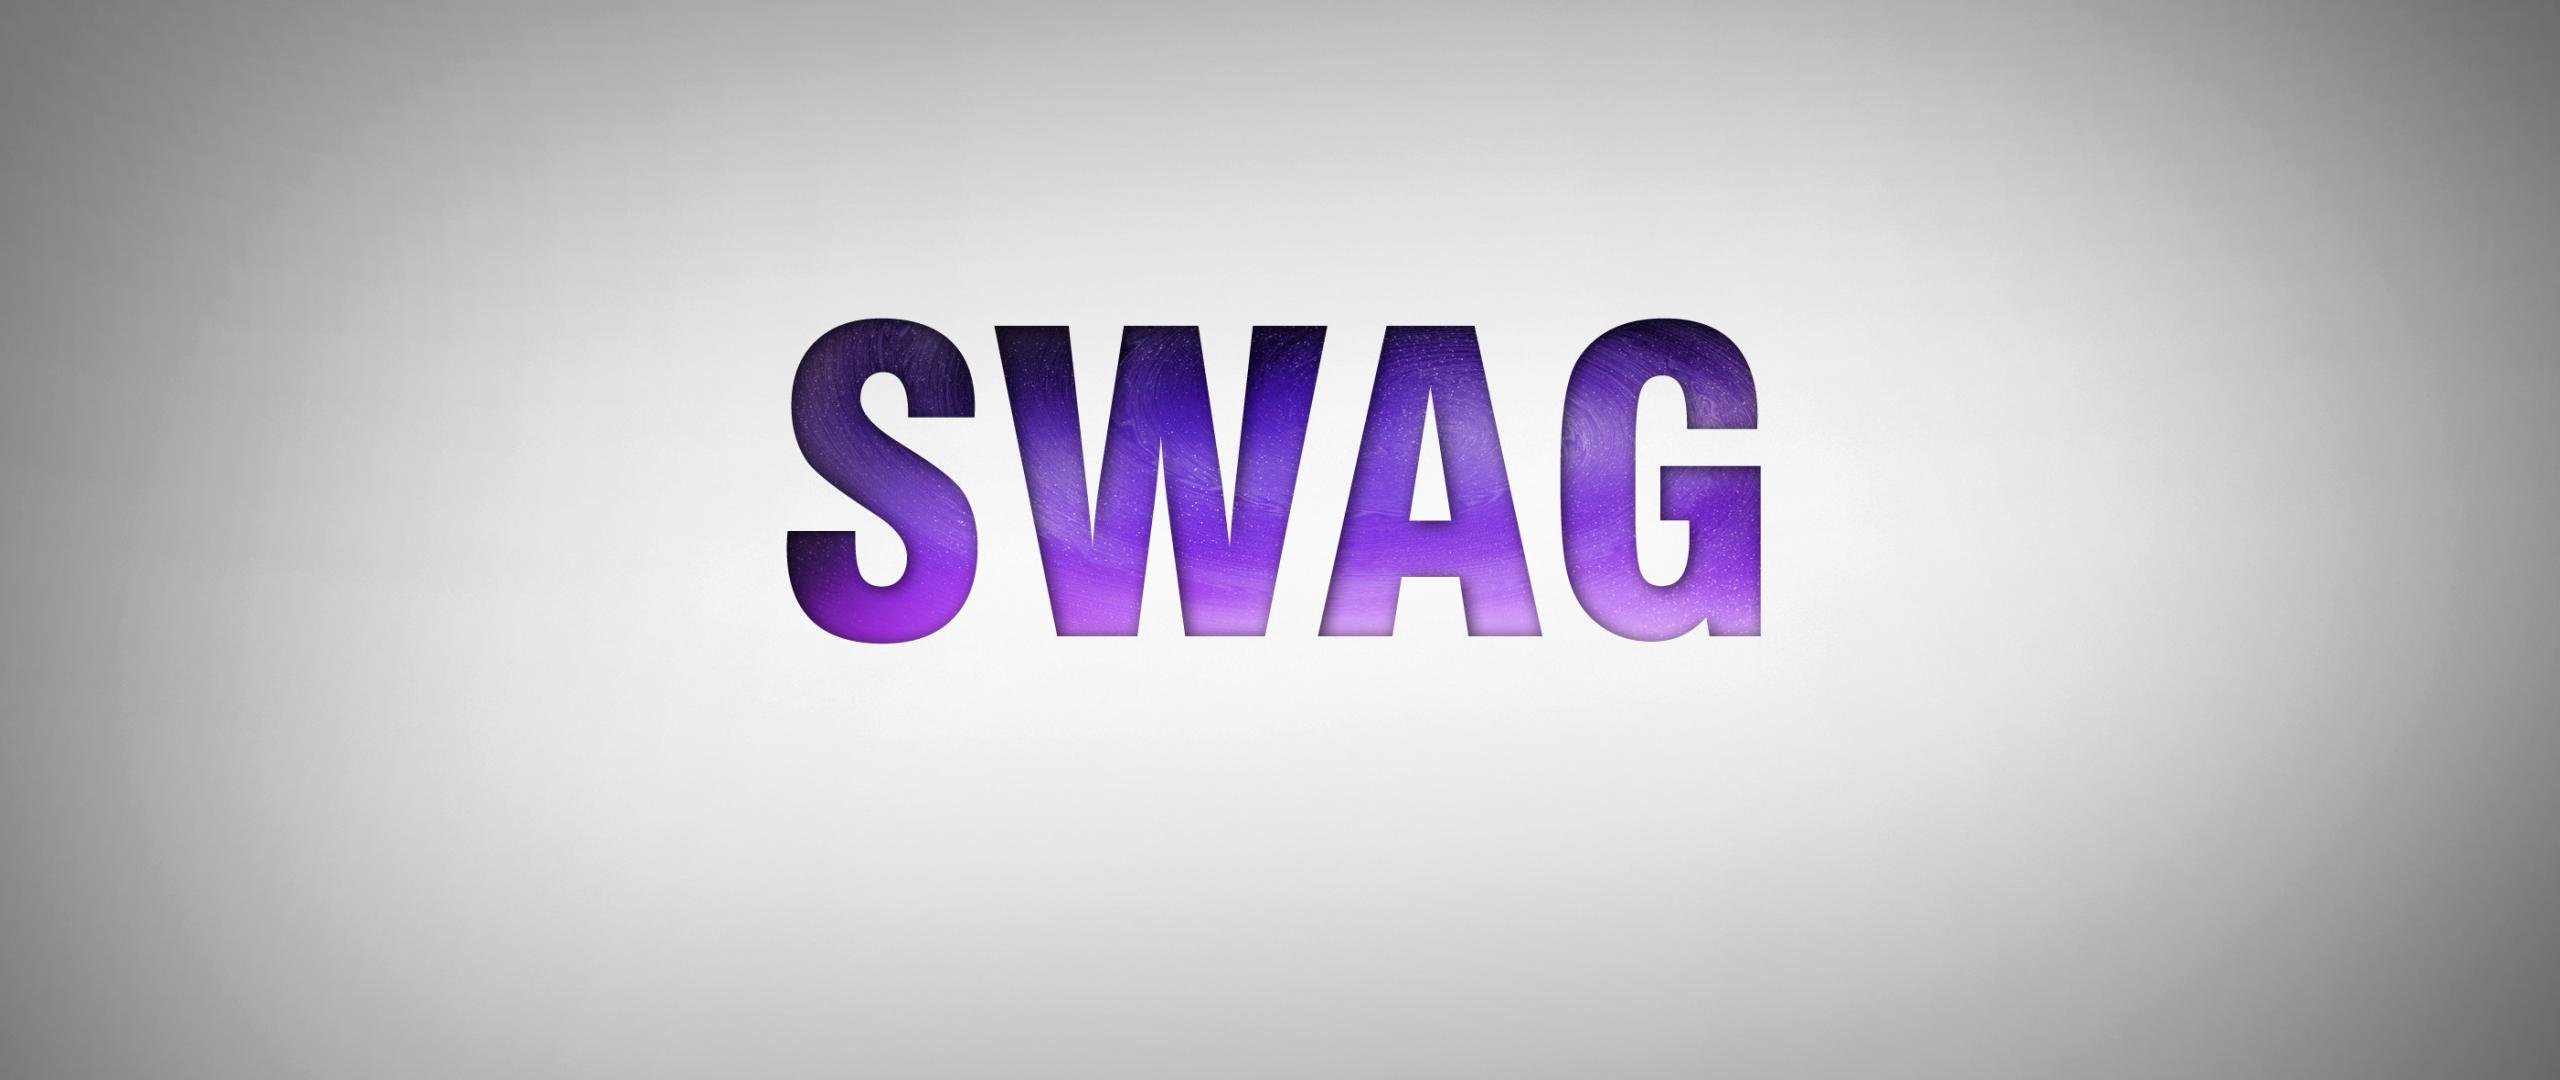 High resolution Swag hd 2560x1080 wallpaper ID:81535 for PC